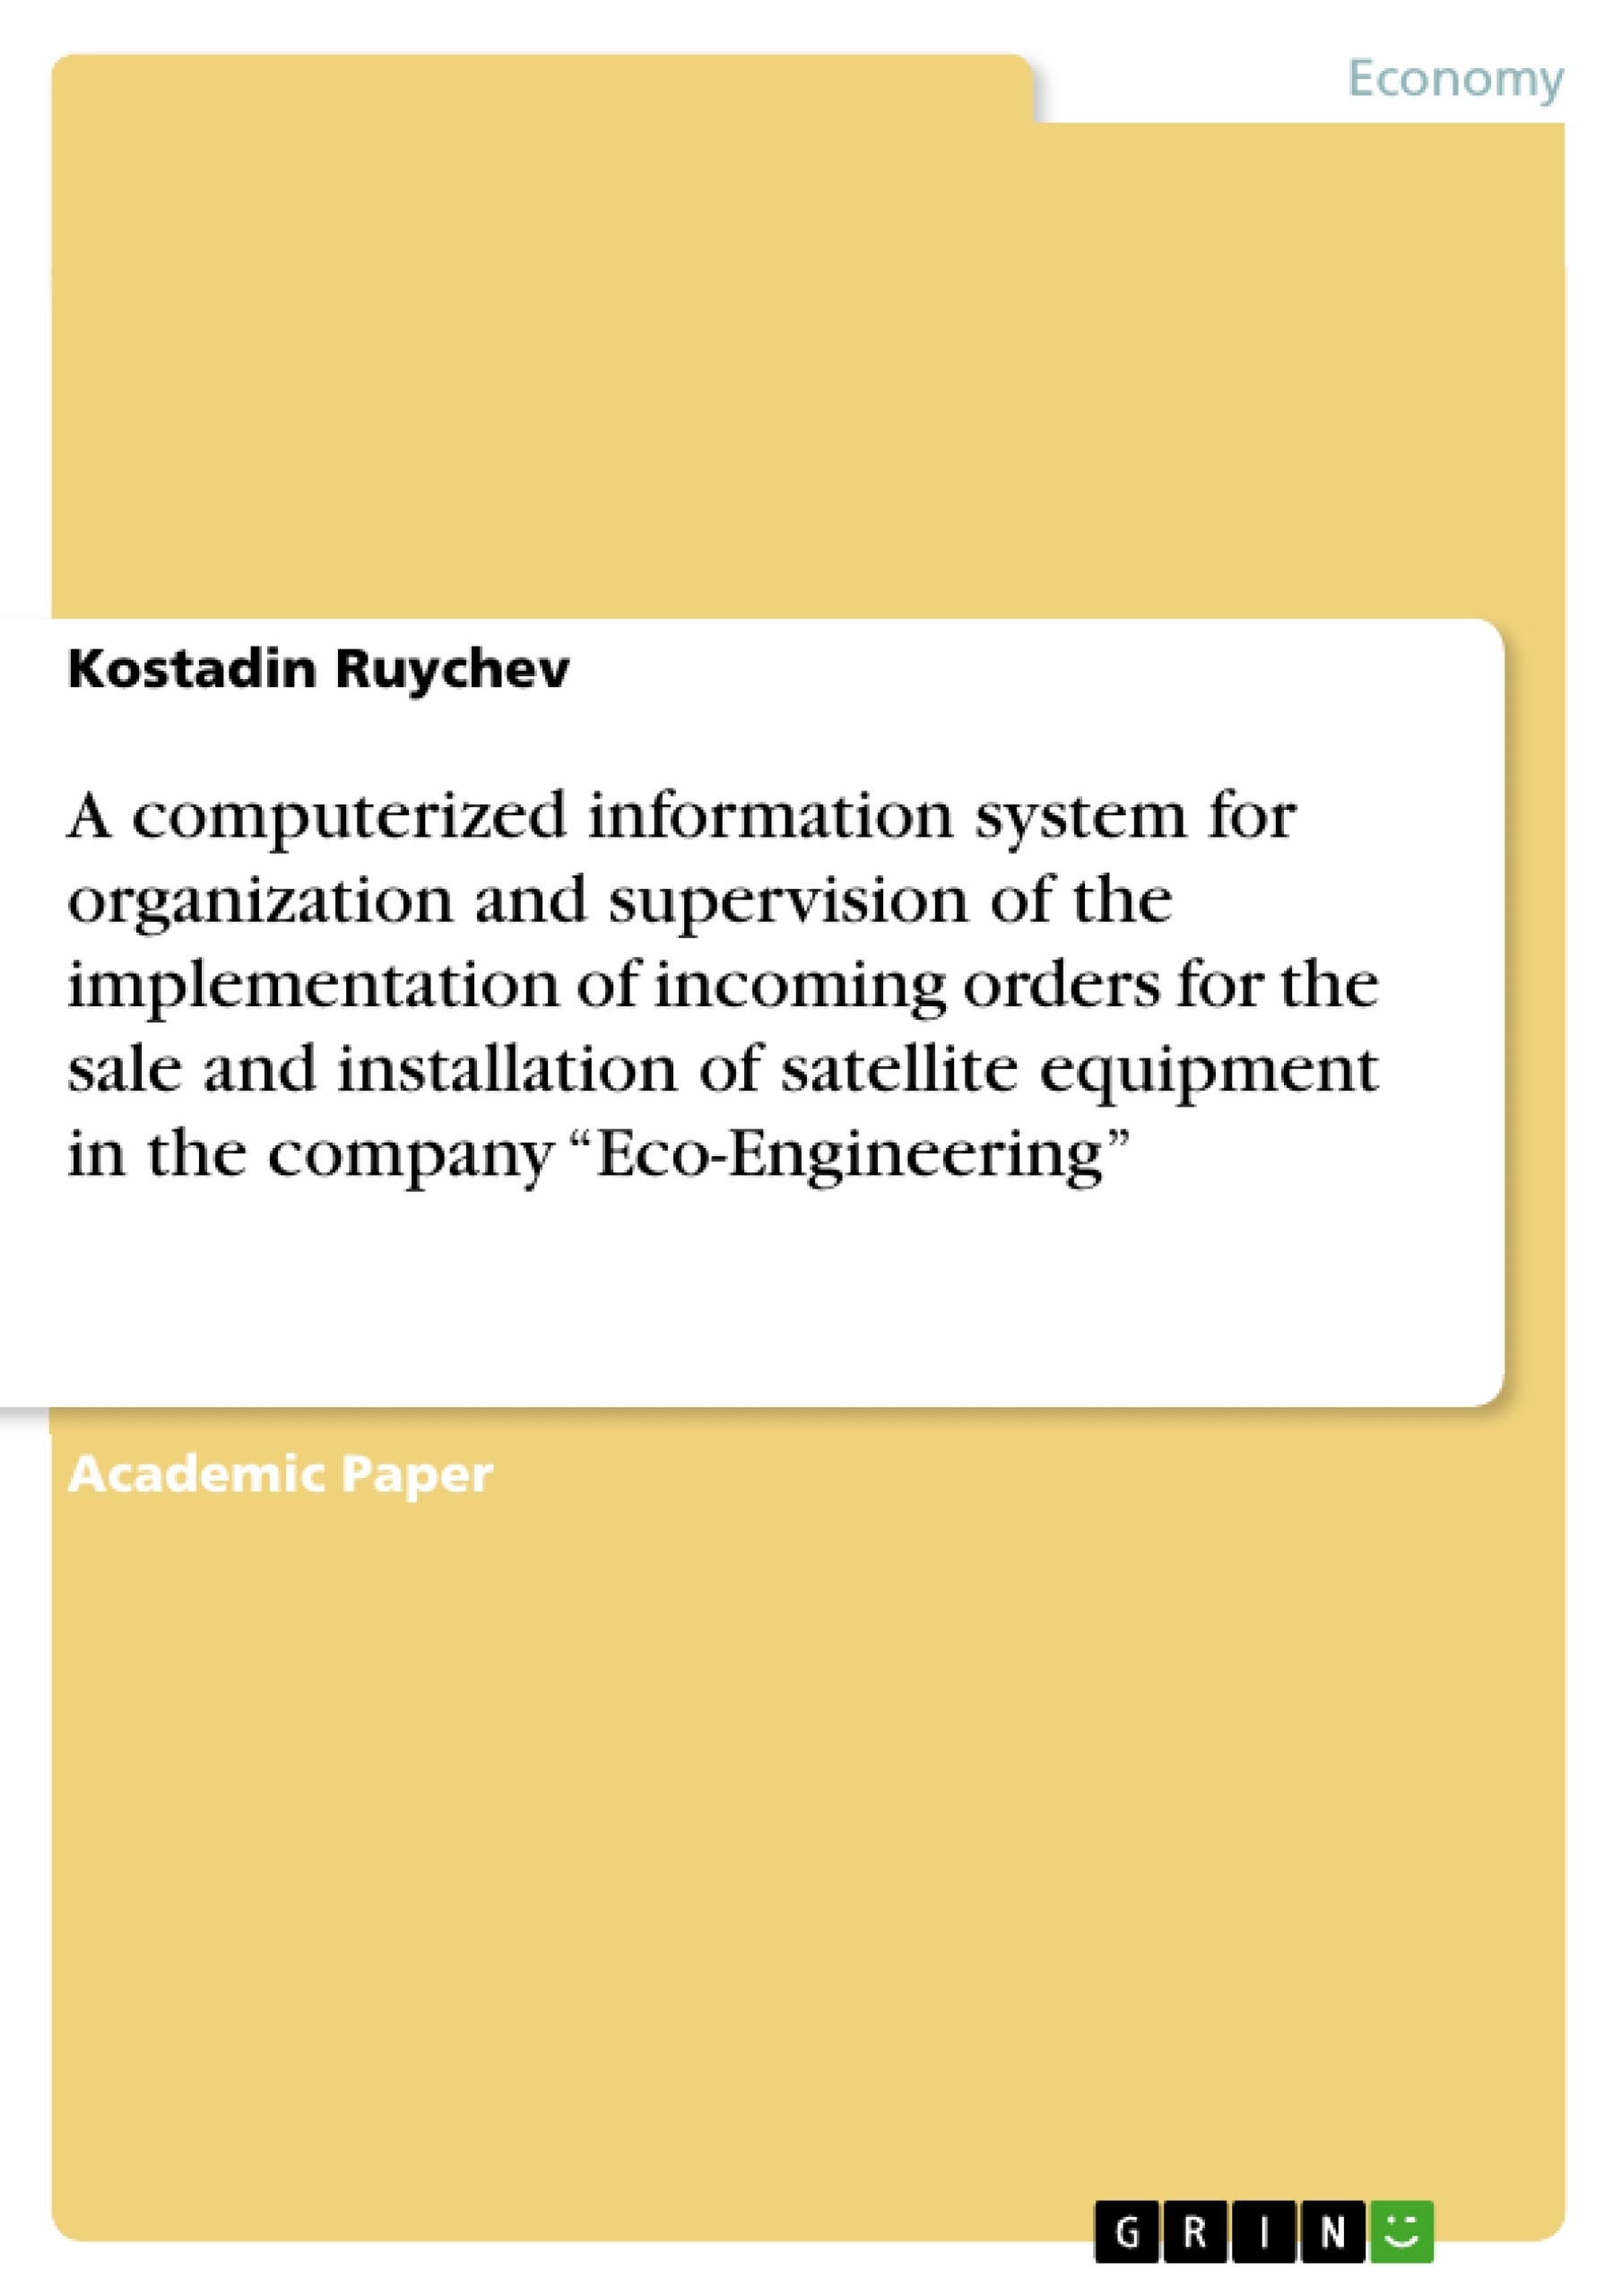 Titel: A computerized information system for organization and supervision of the implementation of incoming orders for the sale and installation of satellite equipment in the company “Eco-Engineering”